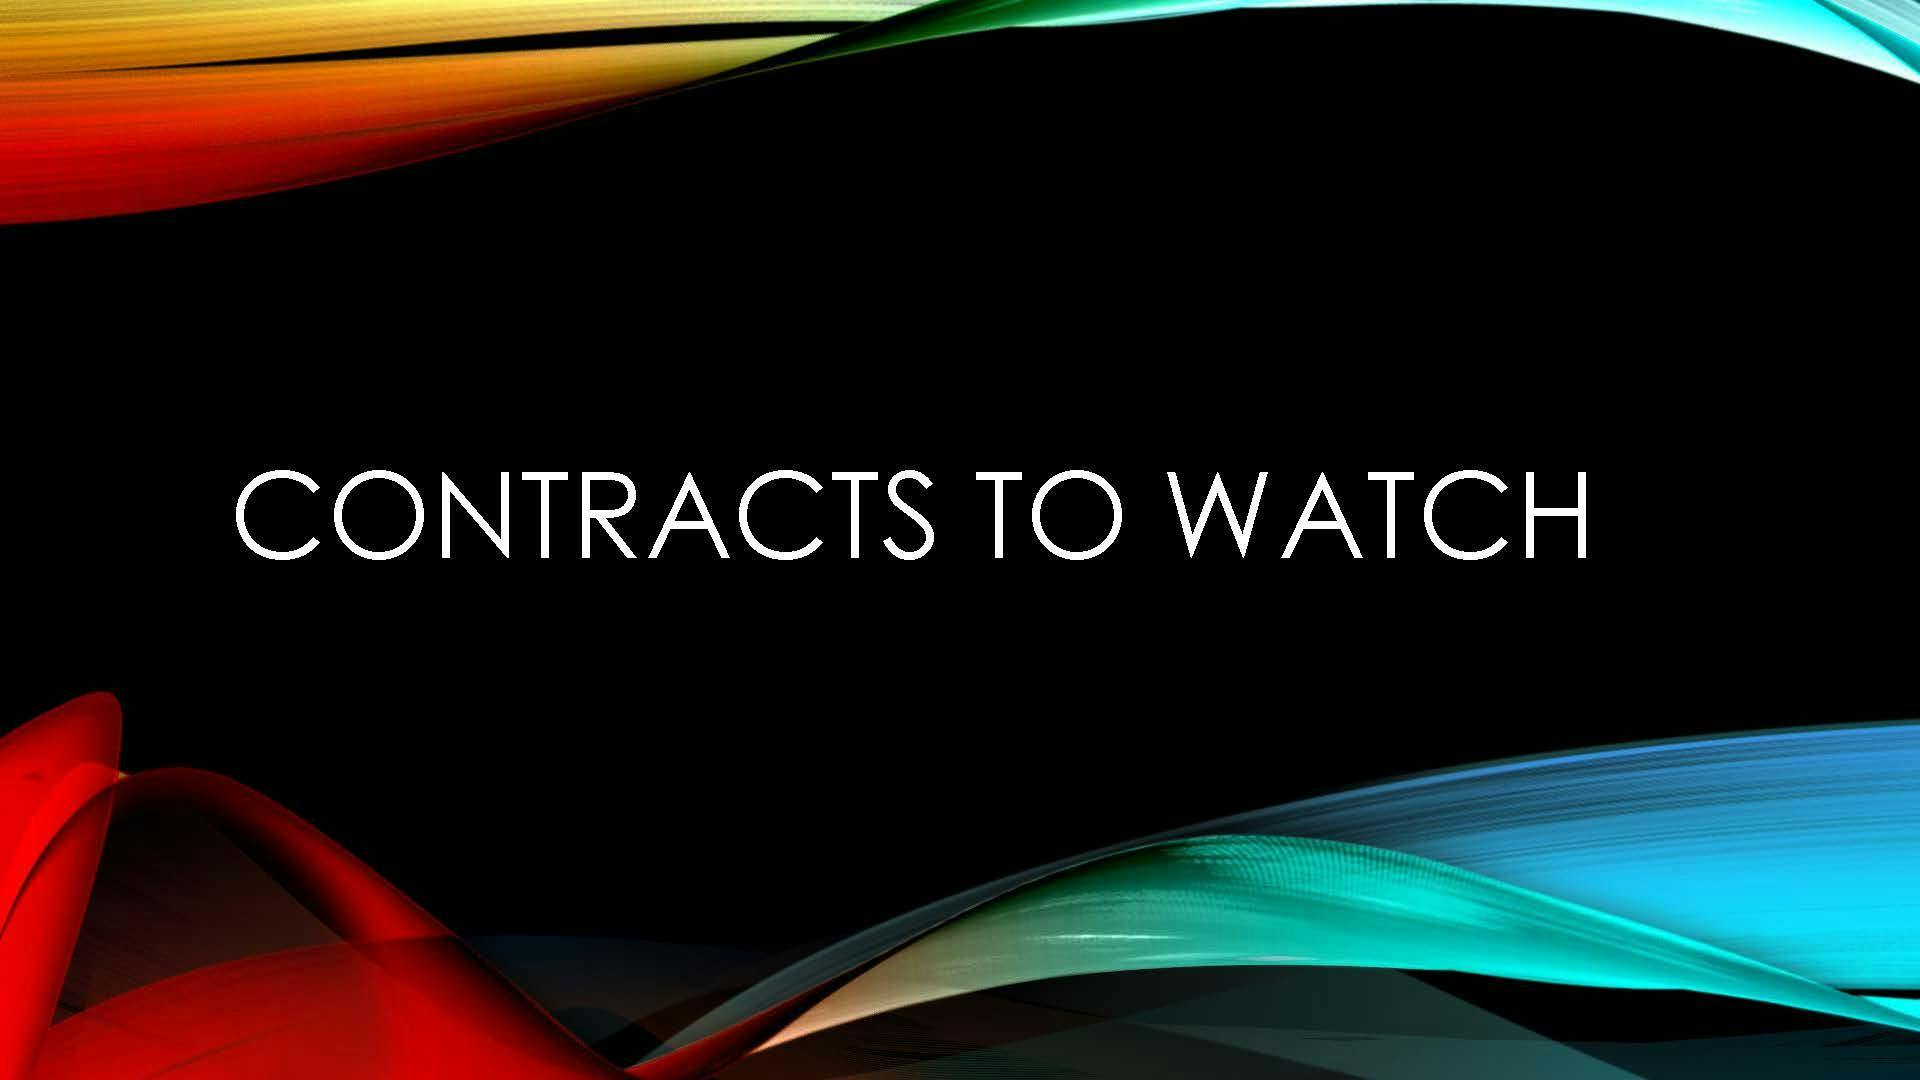 Contracts to Watch - August 21, 2019